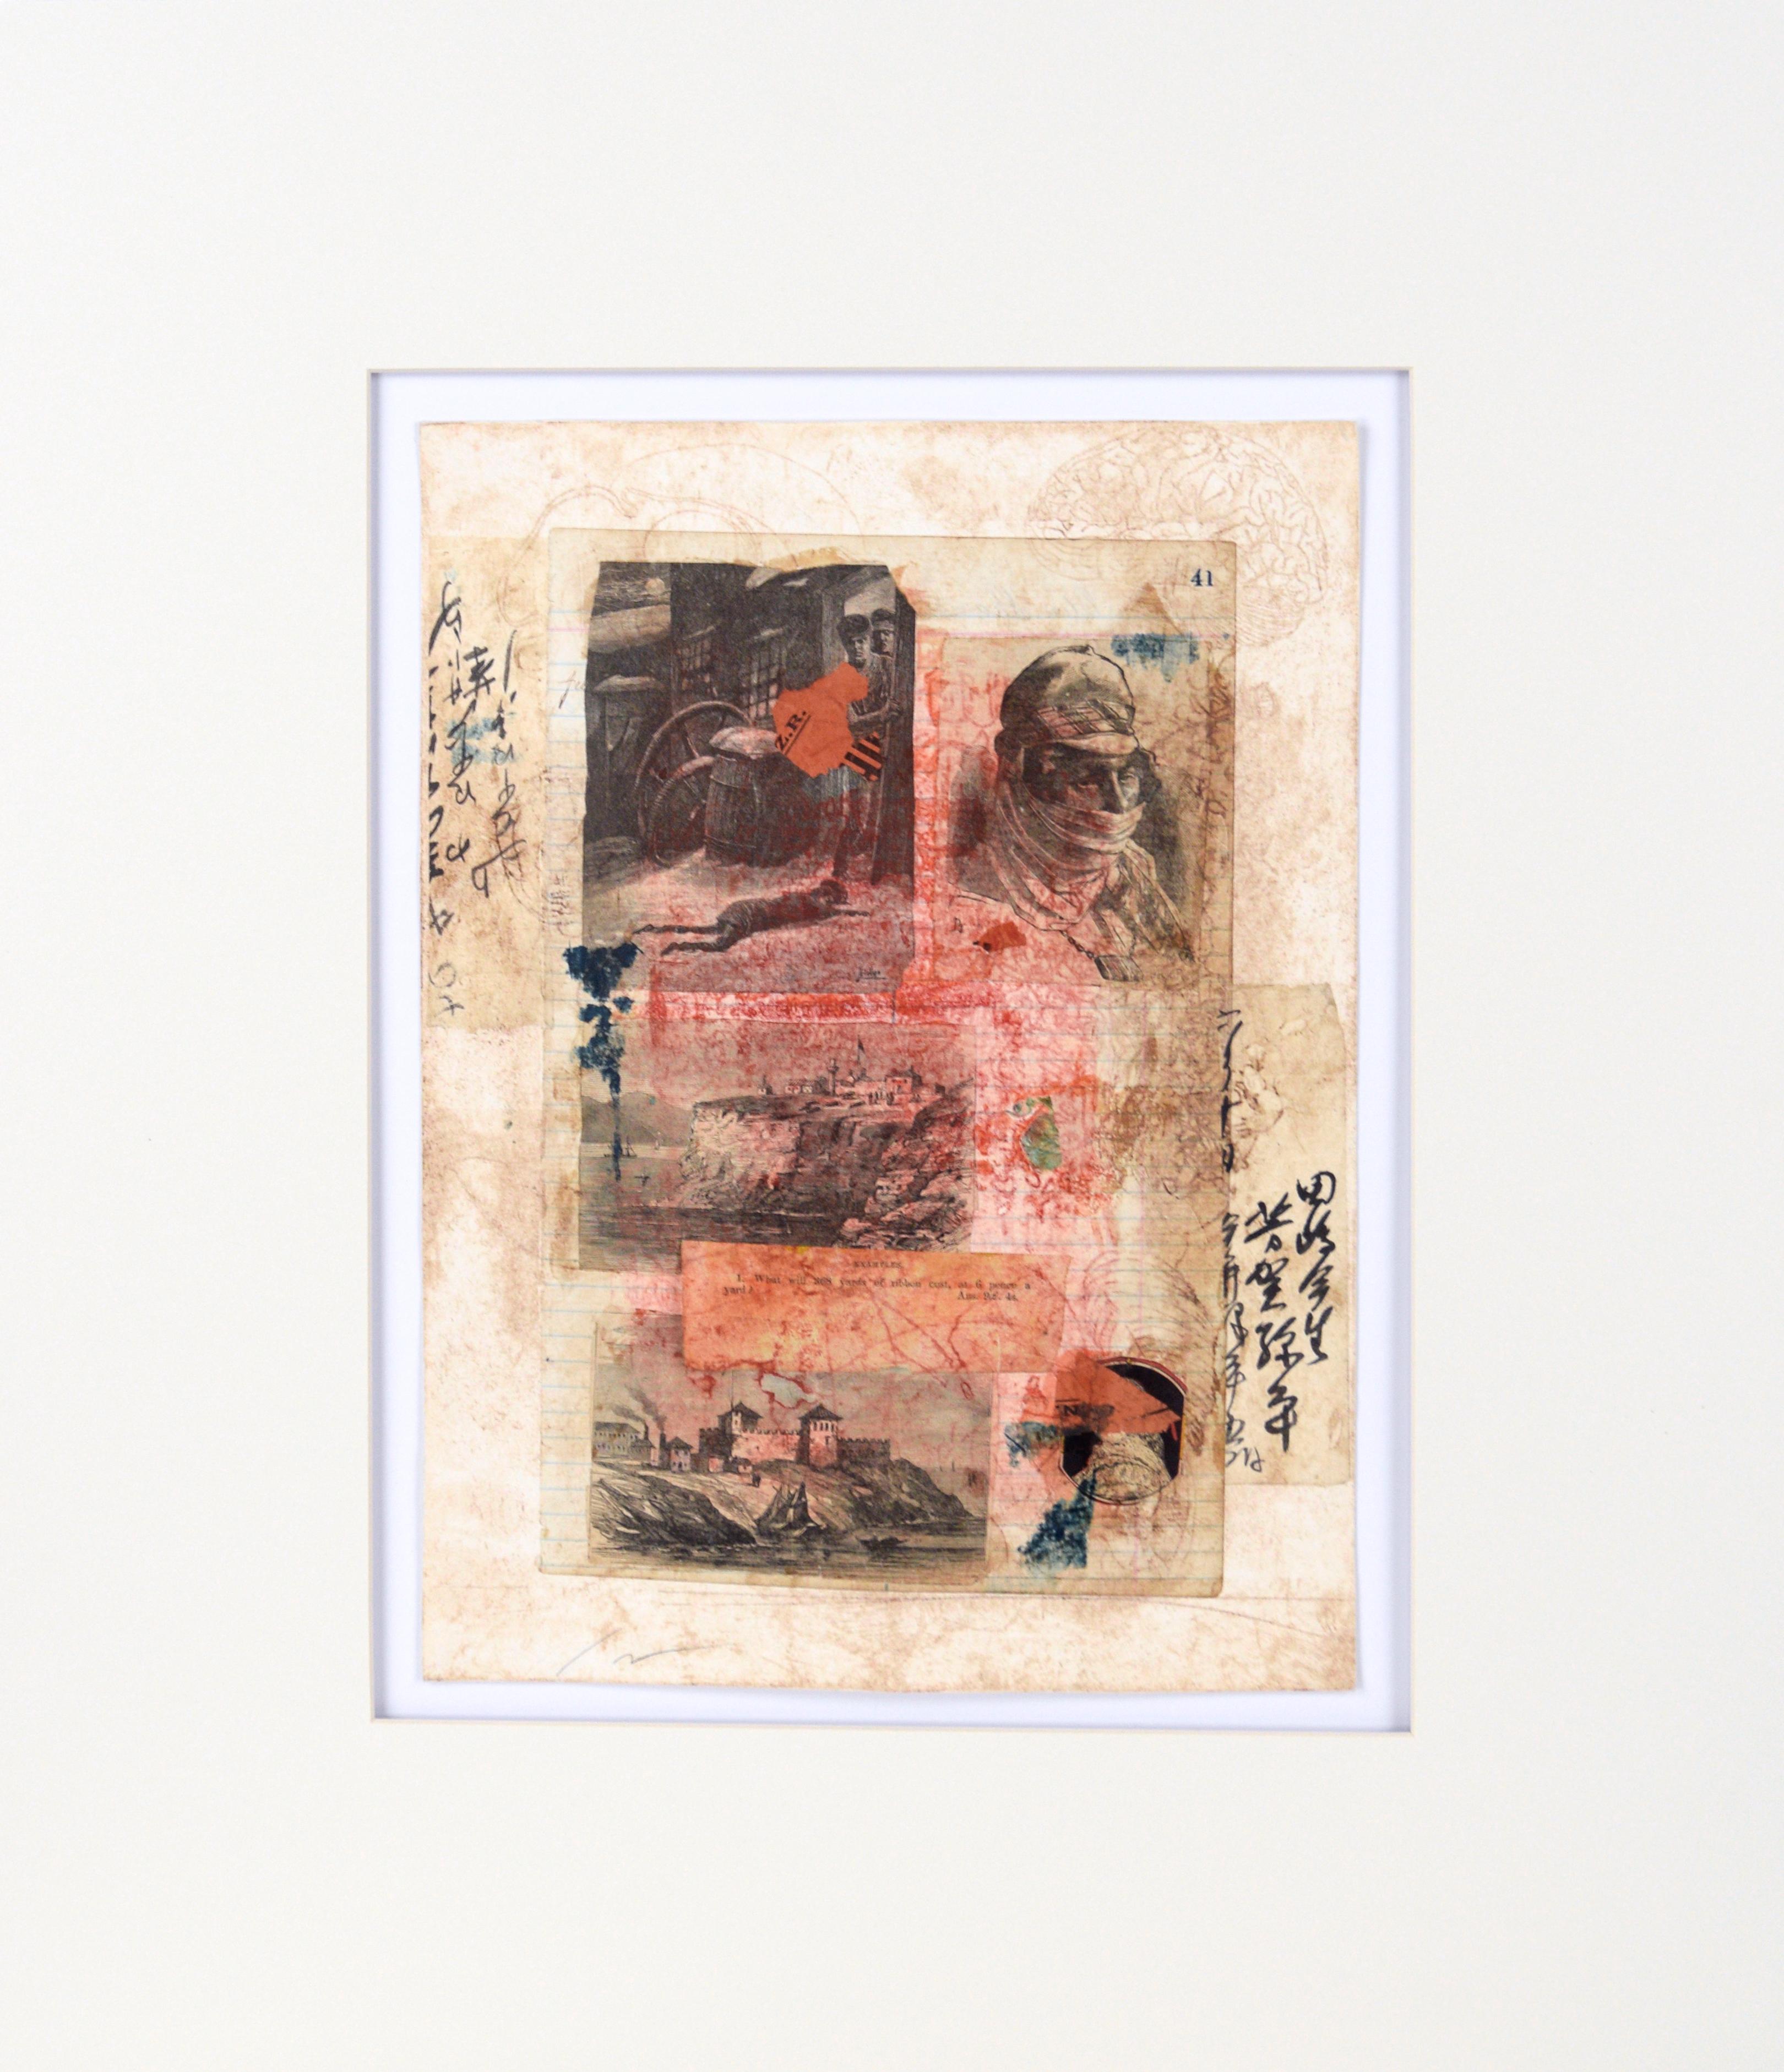 Abstract Painting Michael Pauker  - "Z.R." - Chine Colle Monoprint avec collage